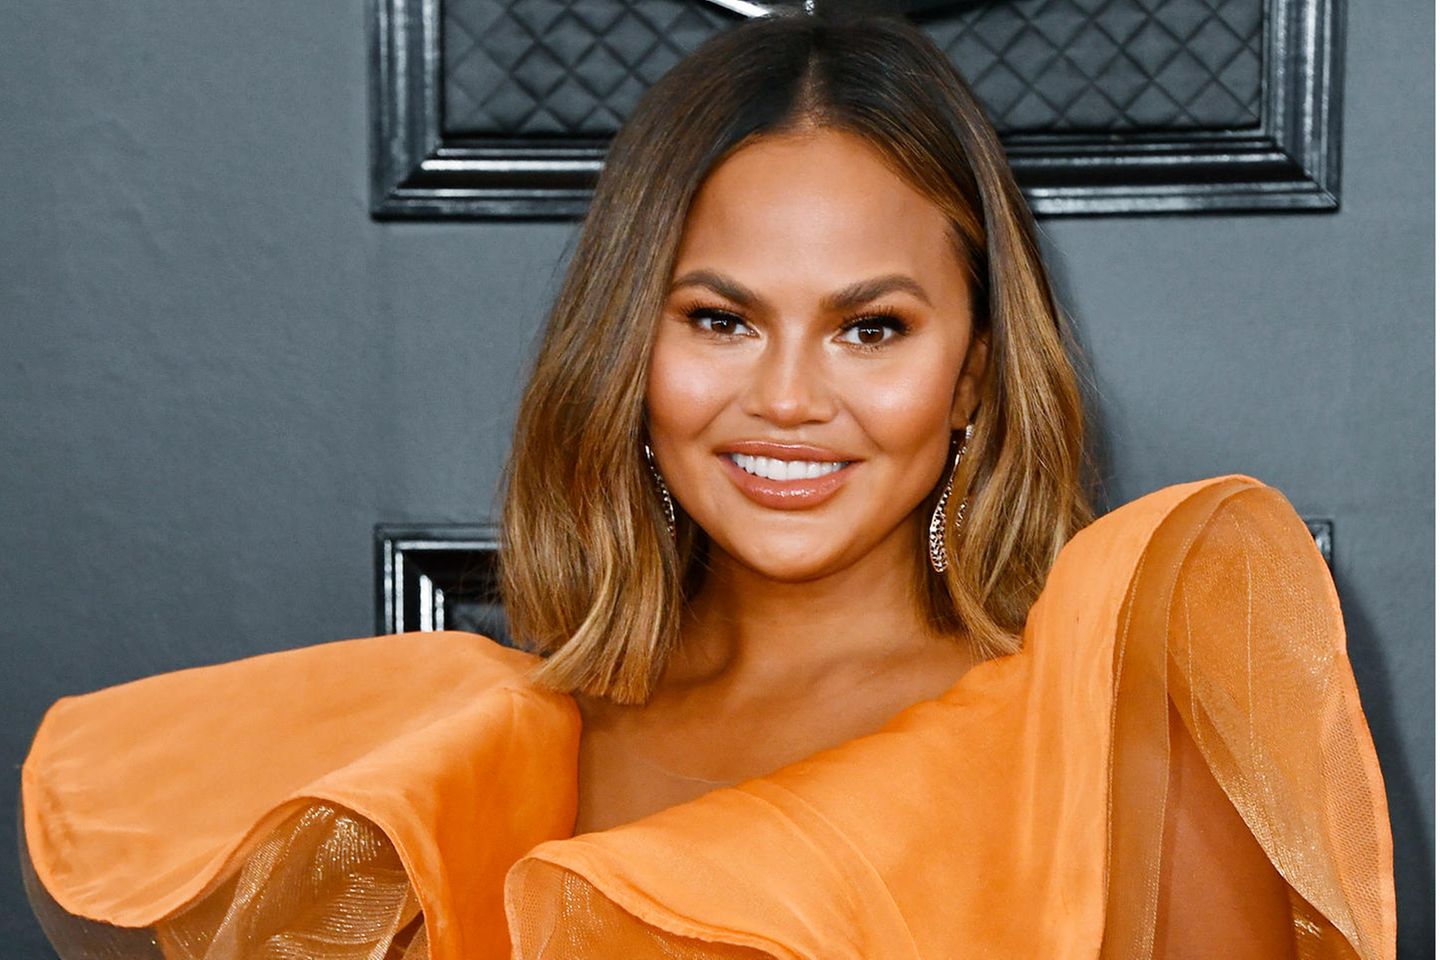 Chrissy Teigen is exiting Netflix’s ‘Never Have I Ever’ after online bullying controversy